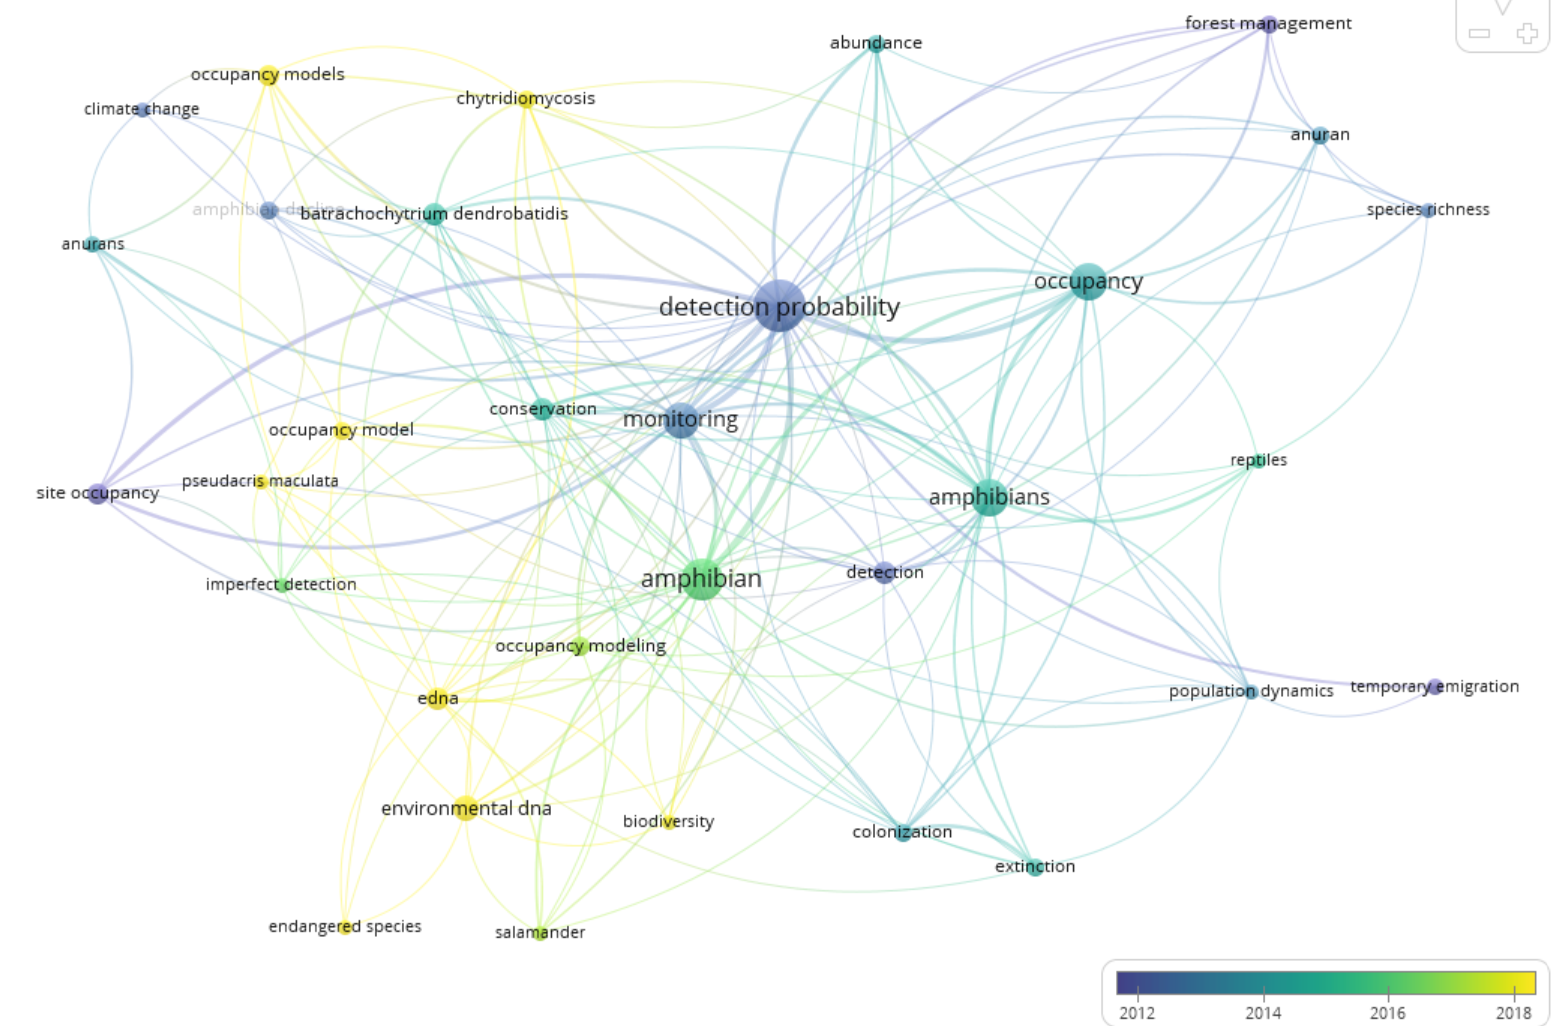 An output using author keywords from Exercise 1 using VOSViewer. Note that the most recent subjects (yellow) are ‘eDNA’ and ‘chytridomycosis’.